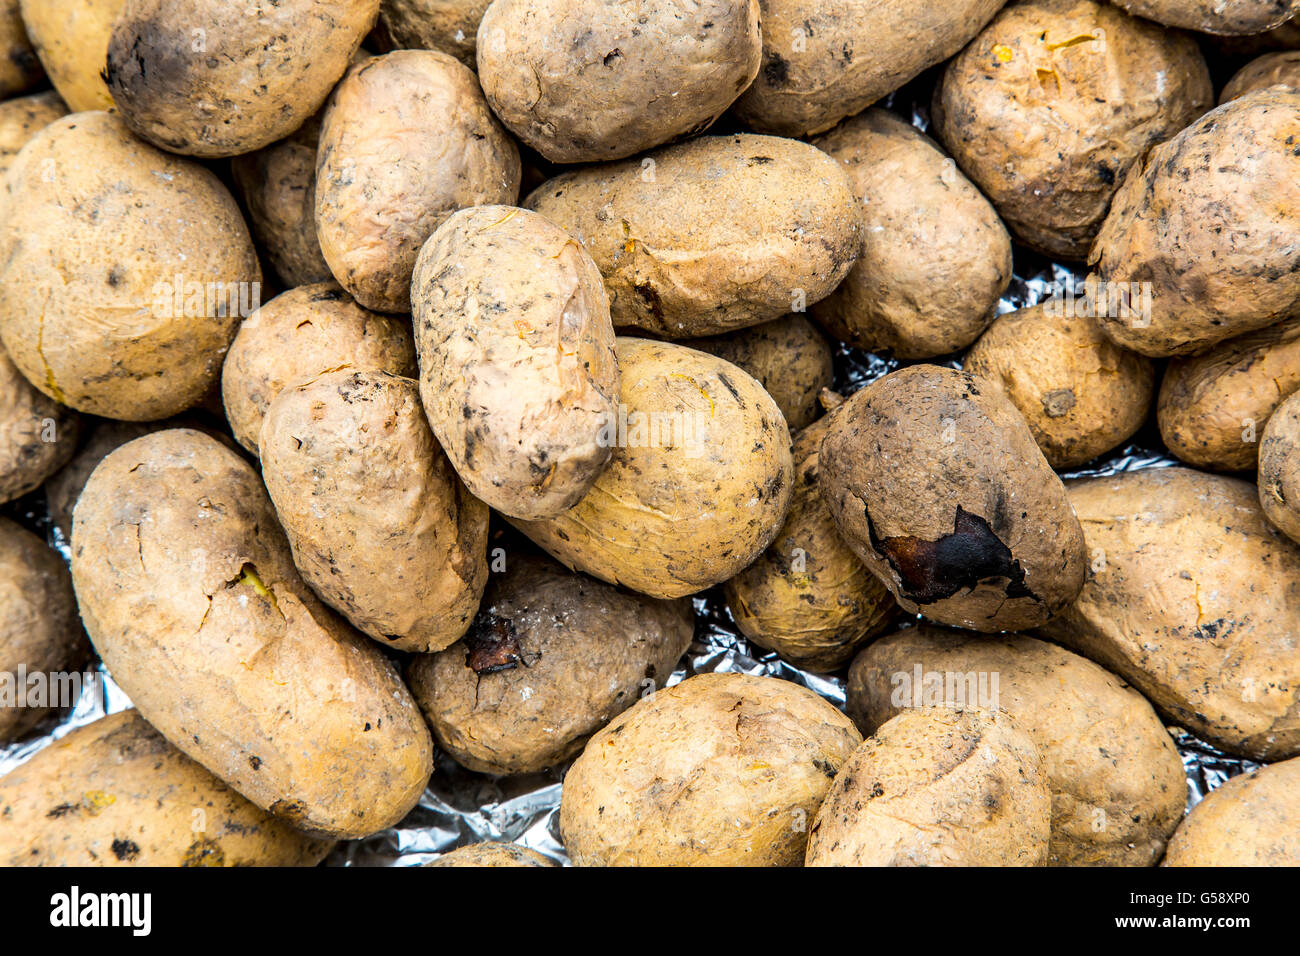 Potatoes, baked in the embers of a campfire, food, burning ash, glow, Stock Photo